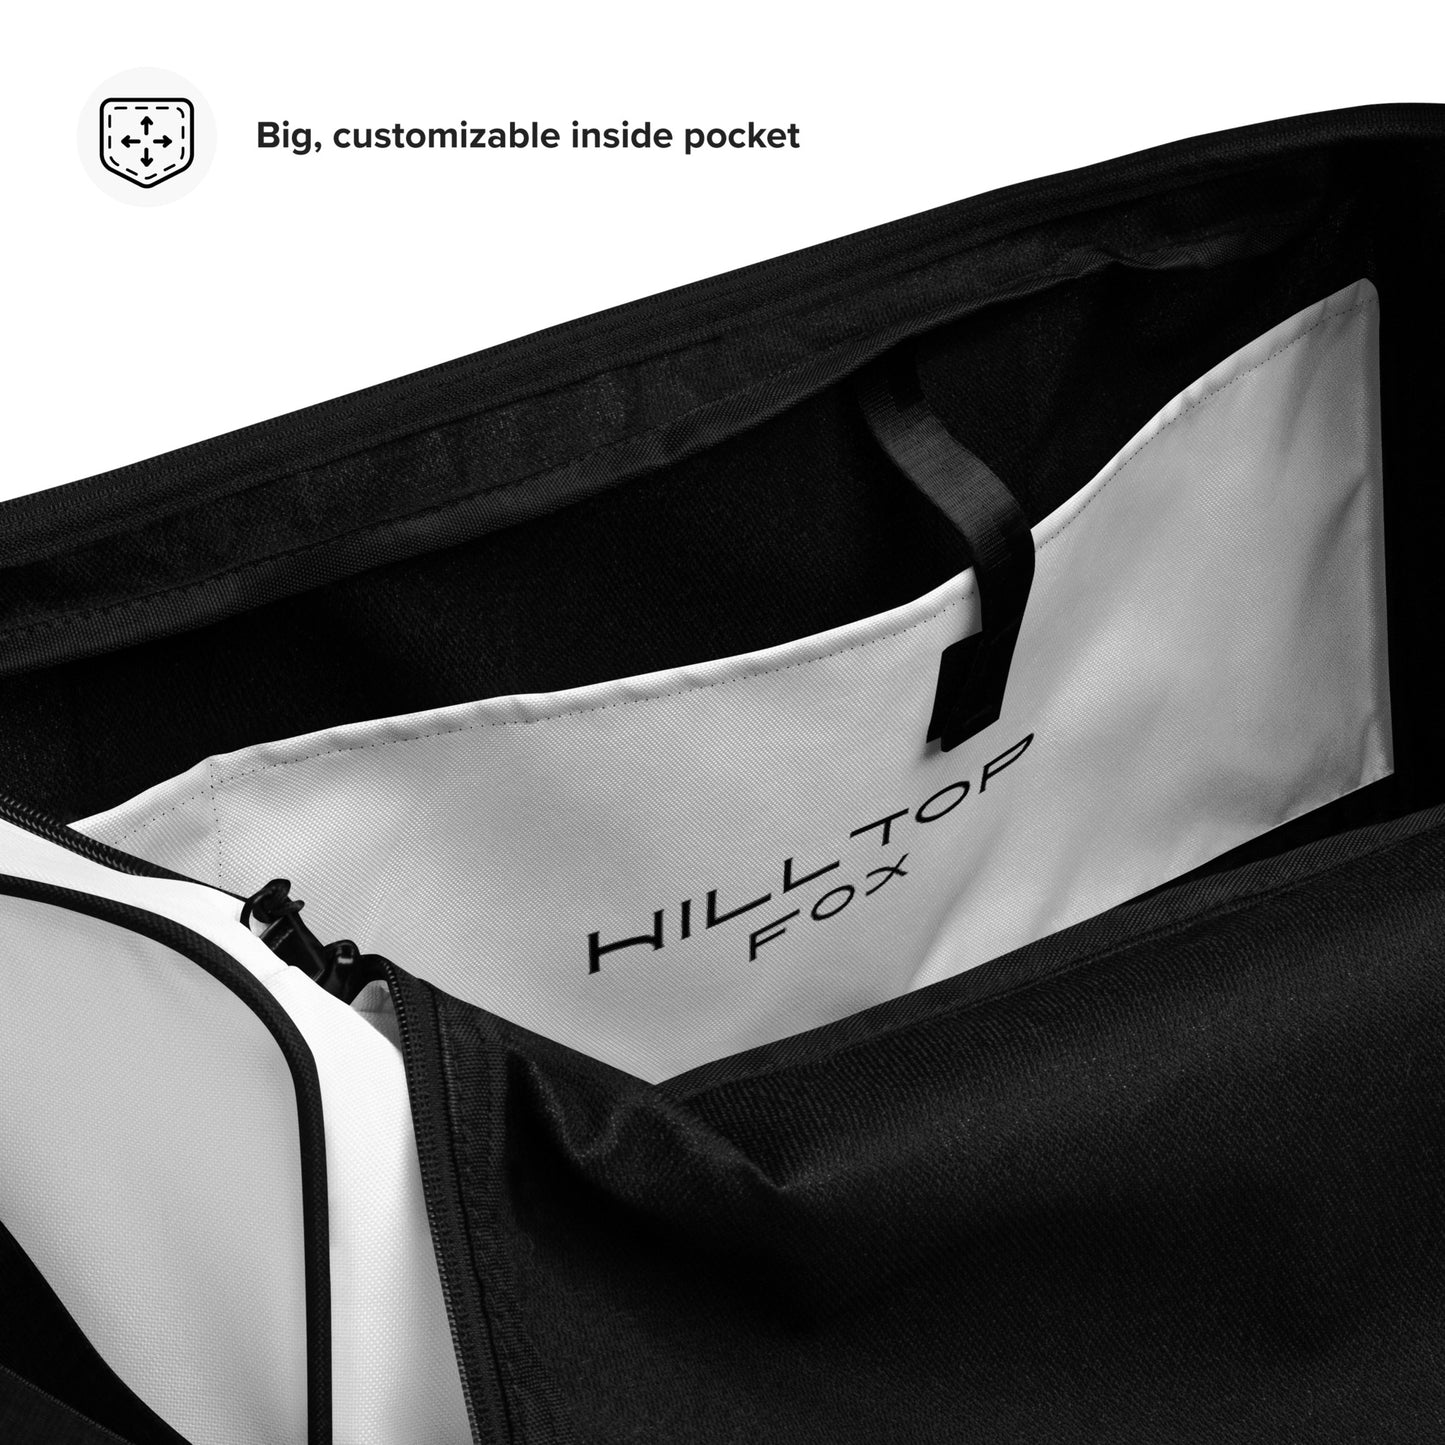 Extra Large Duffle bag by Hilltop Fox